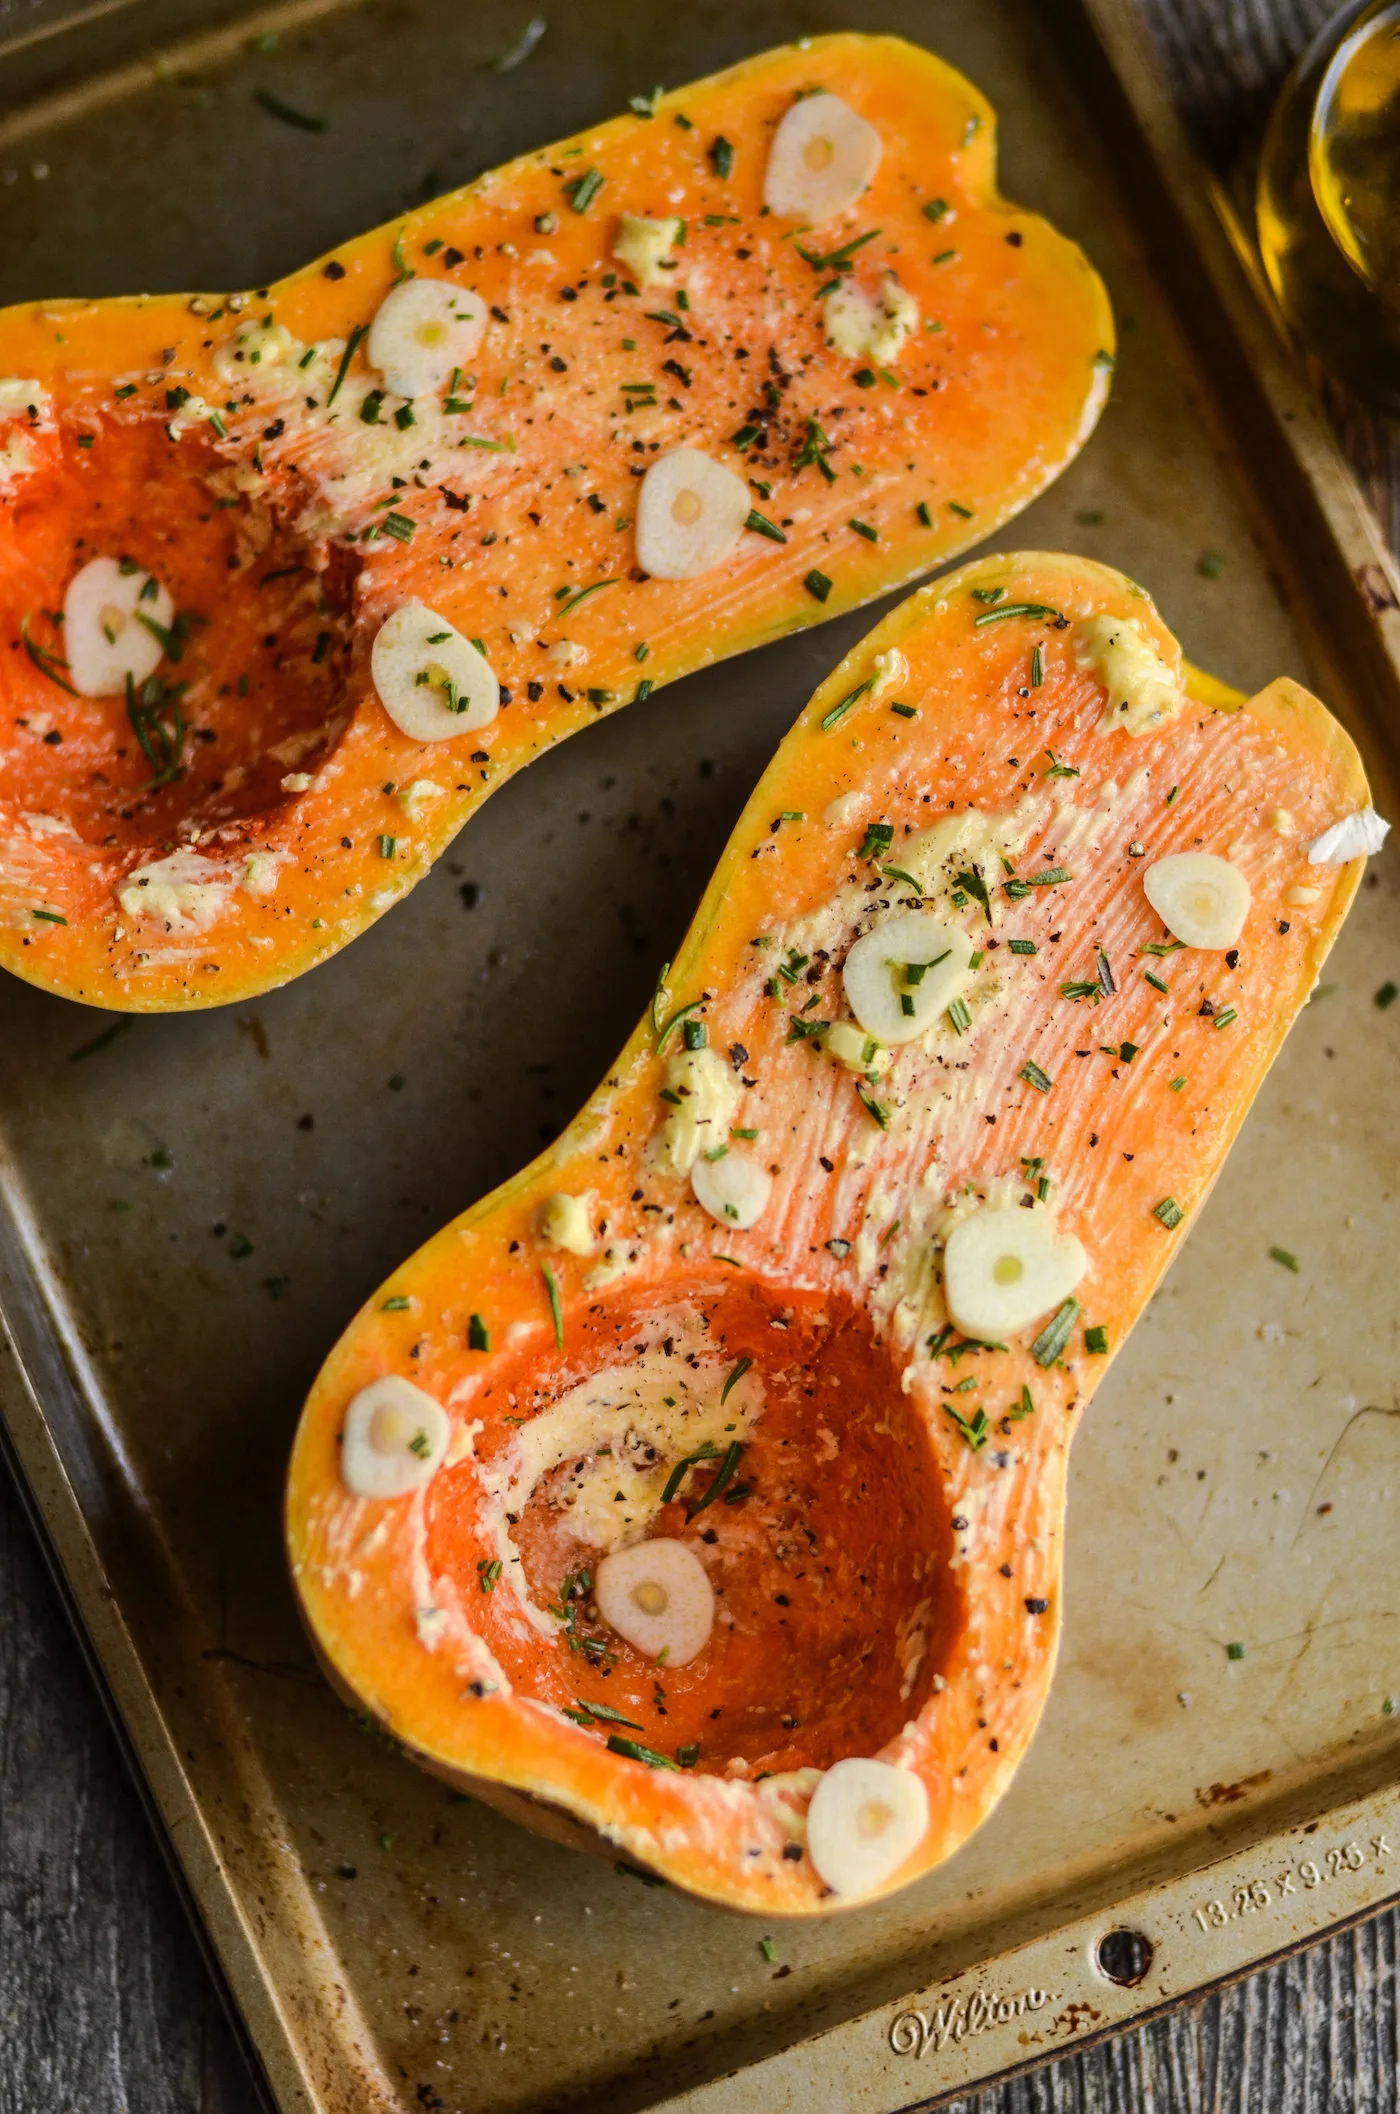 Squash with butter, rosemary, and garlic on top